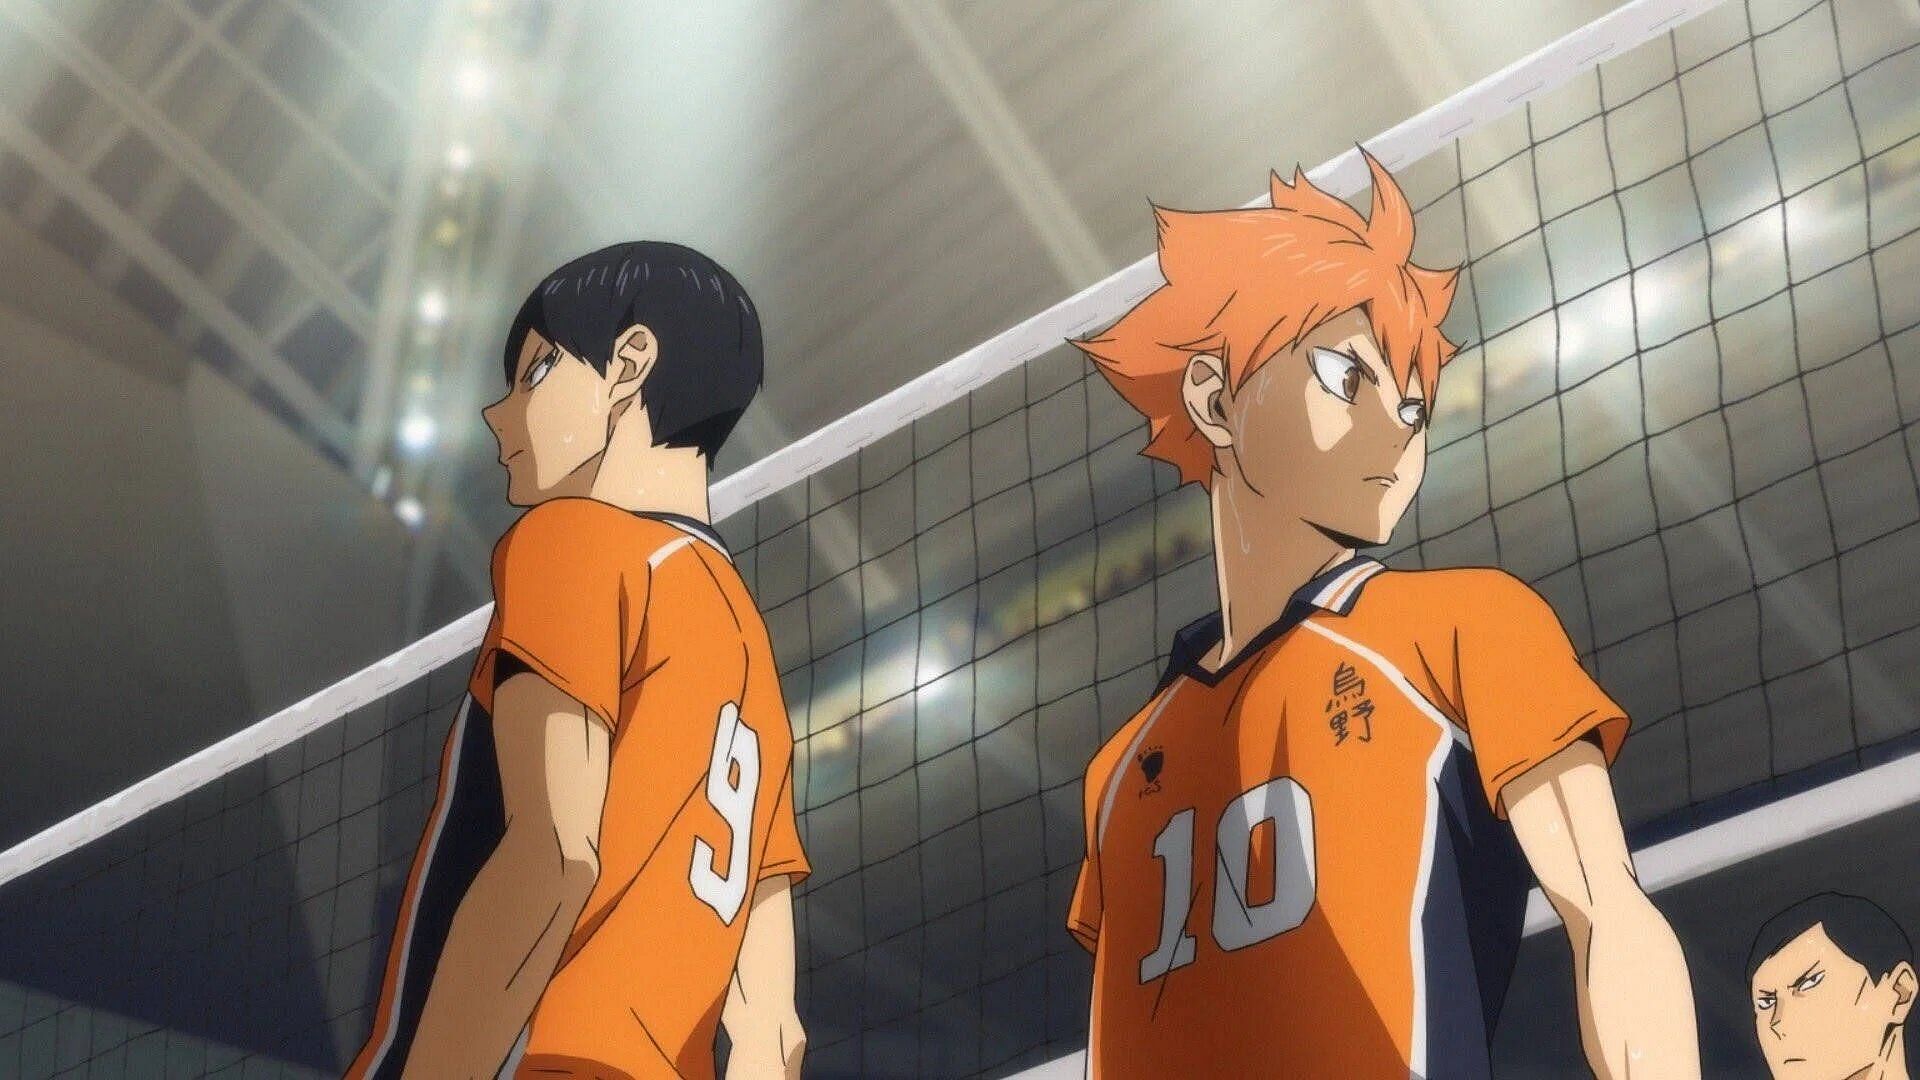 Haikyuu!! and the reasons for the series